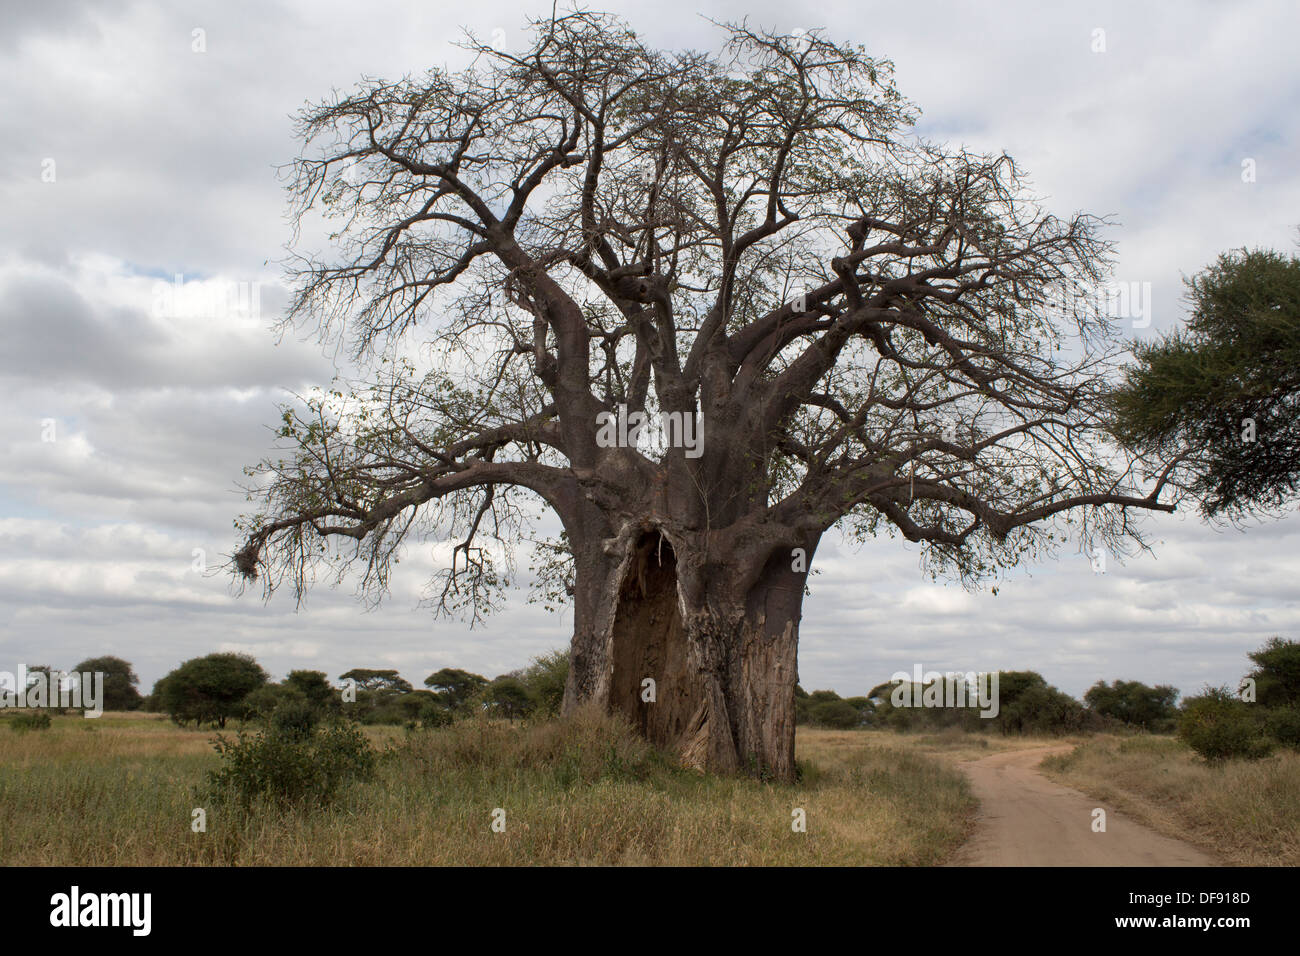 Baobab Tree, also known as the upside down tree, with elephant damage in Tarangire Park, Tanzania, Africa Stock Photo